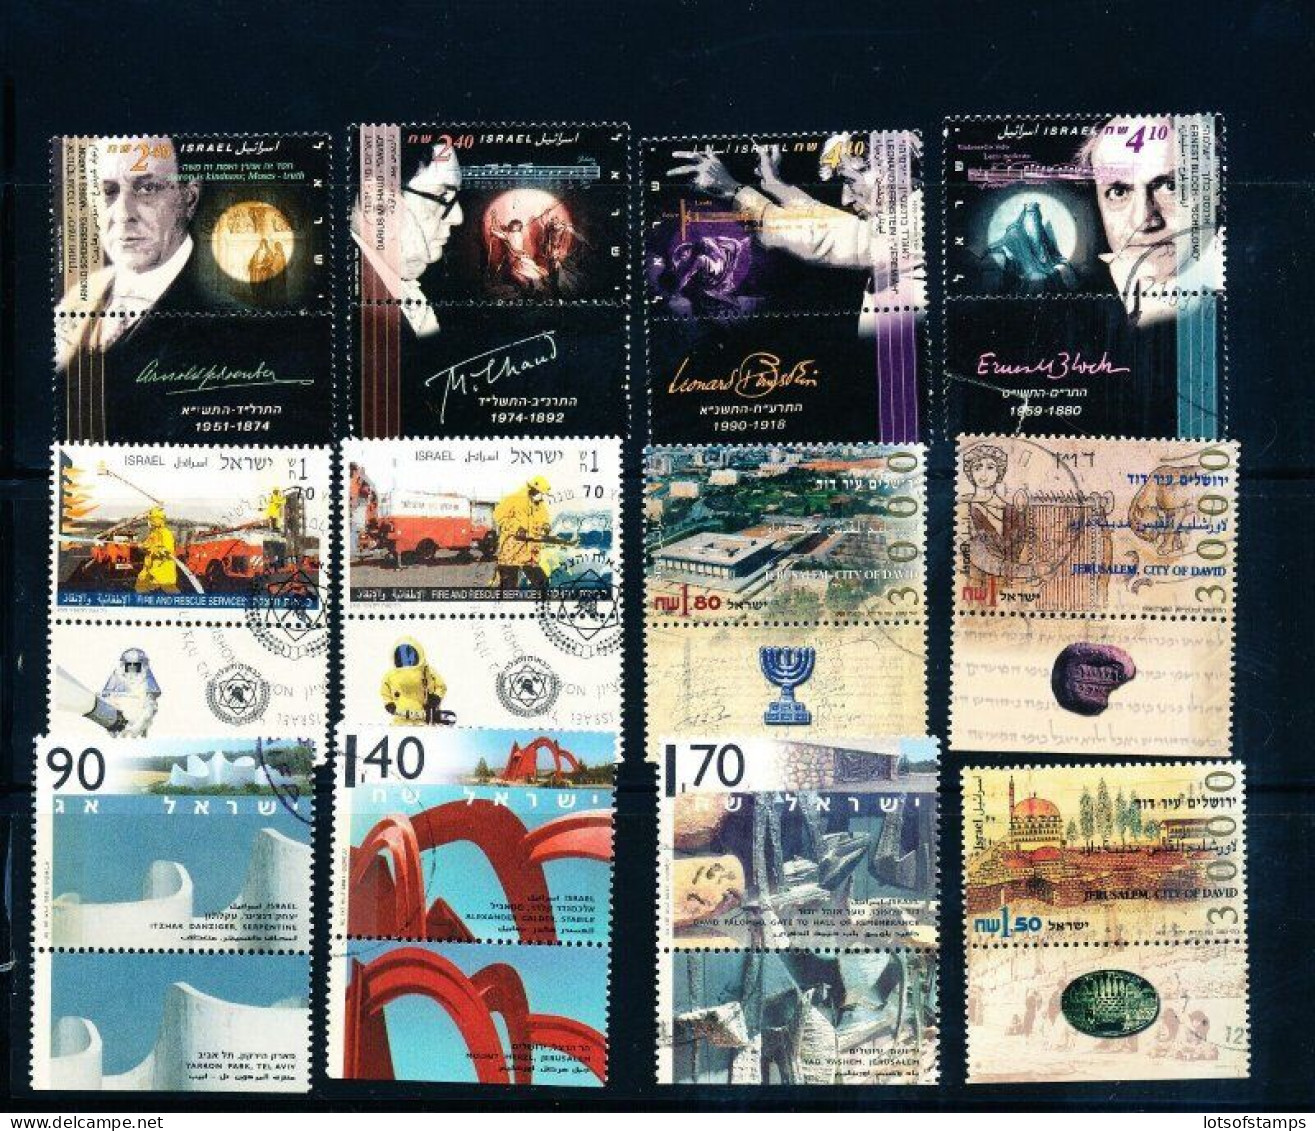 Israel 1995 Year Set Full Tabs + S/sheets VF WITH 1st DAY POST MARKS - Oblitérés (avec Tabs)